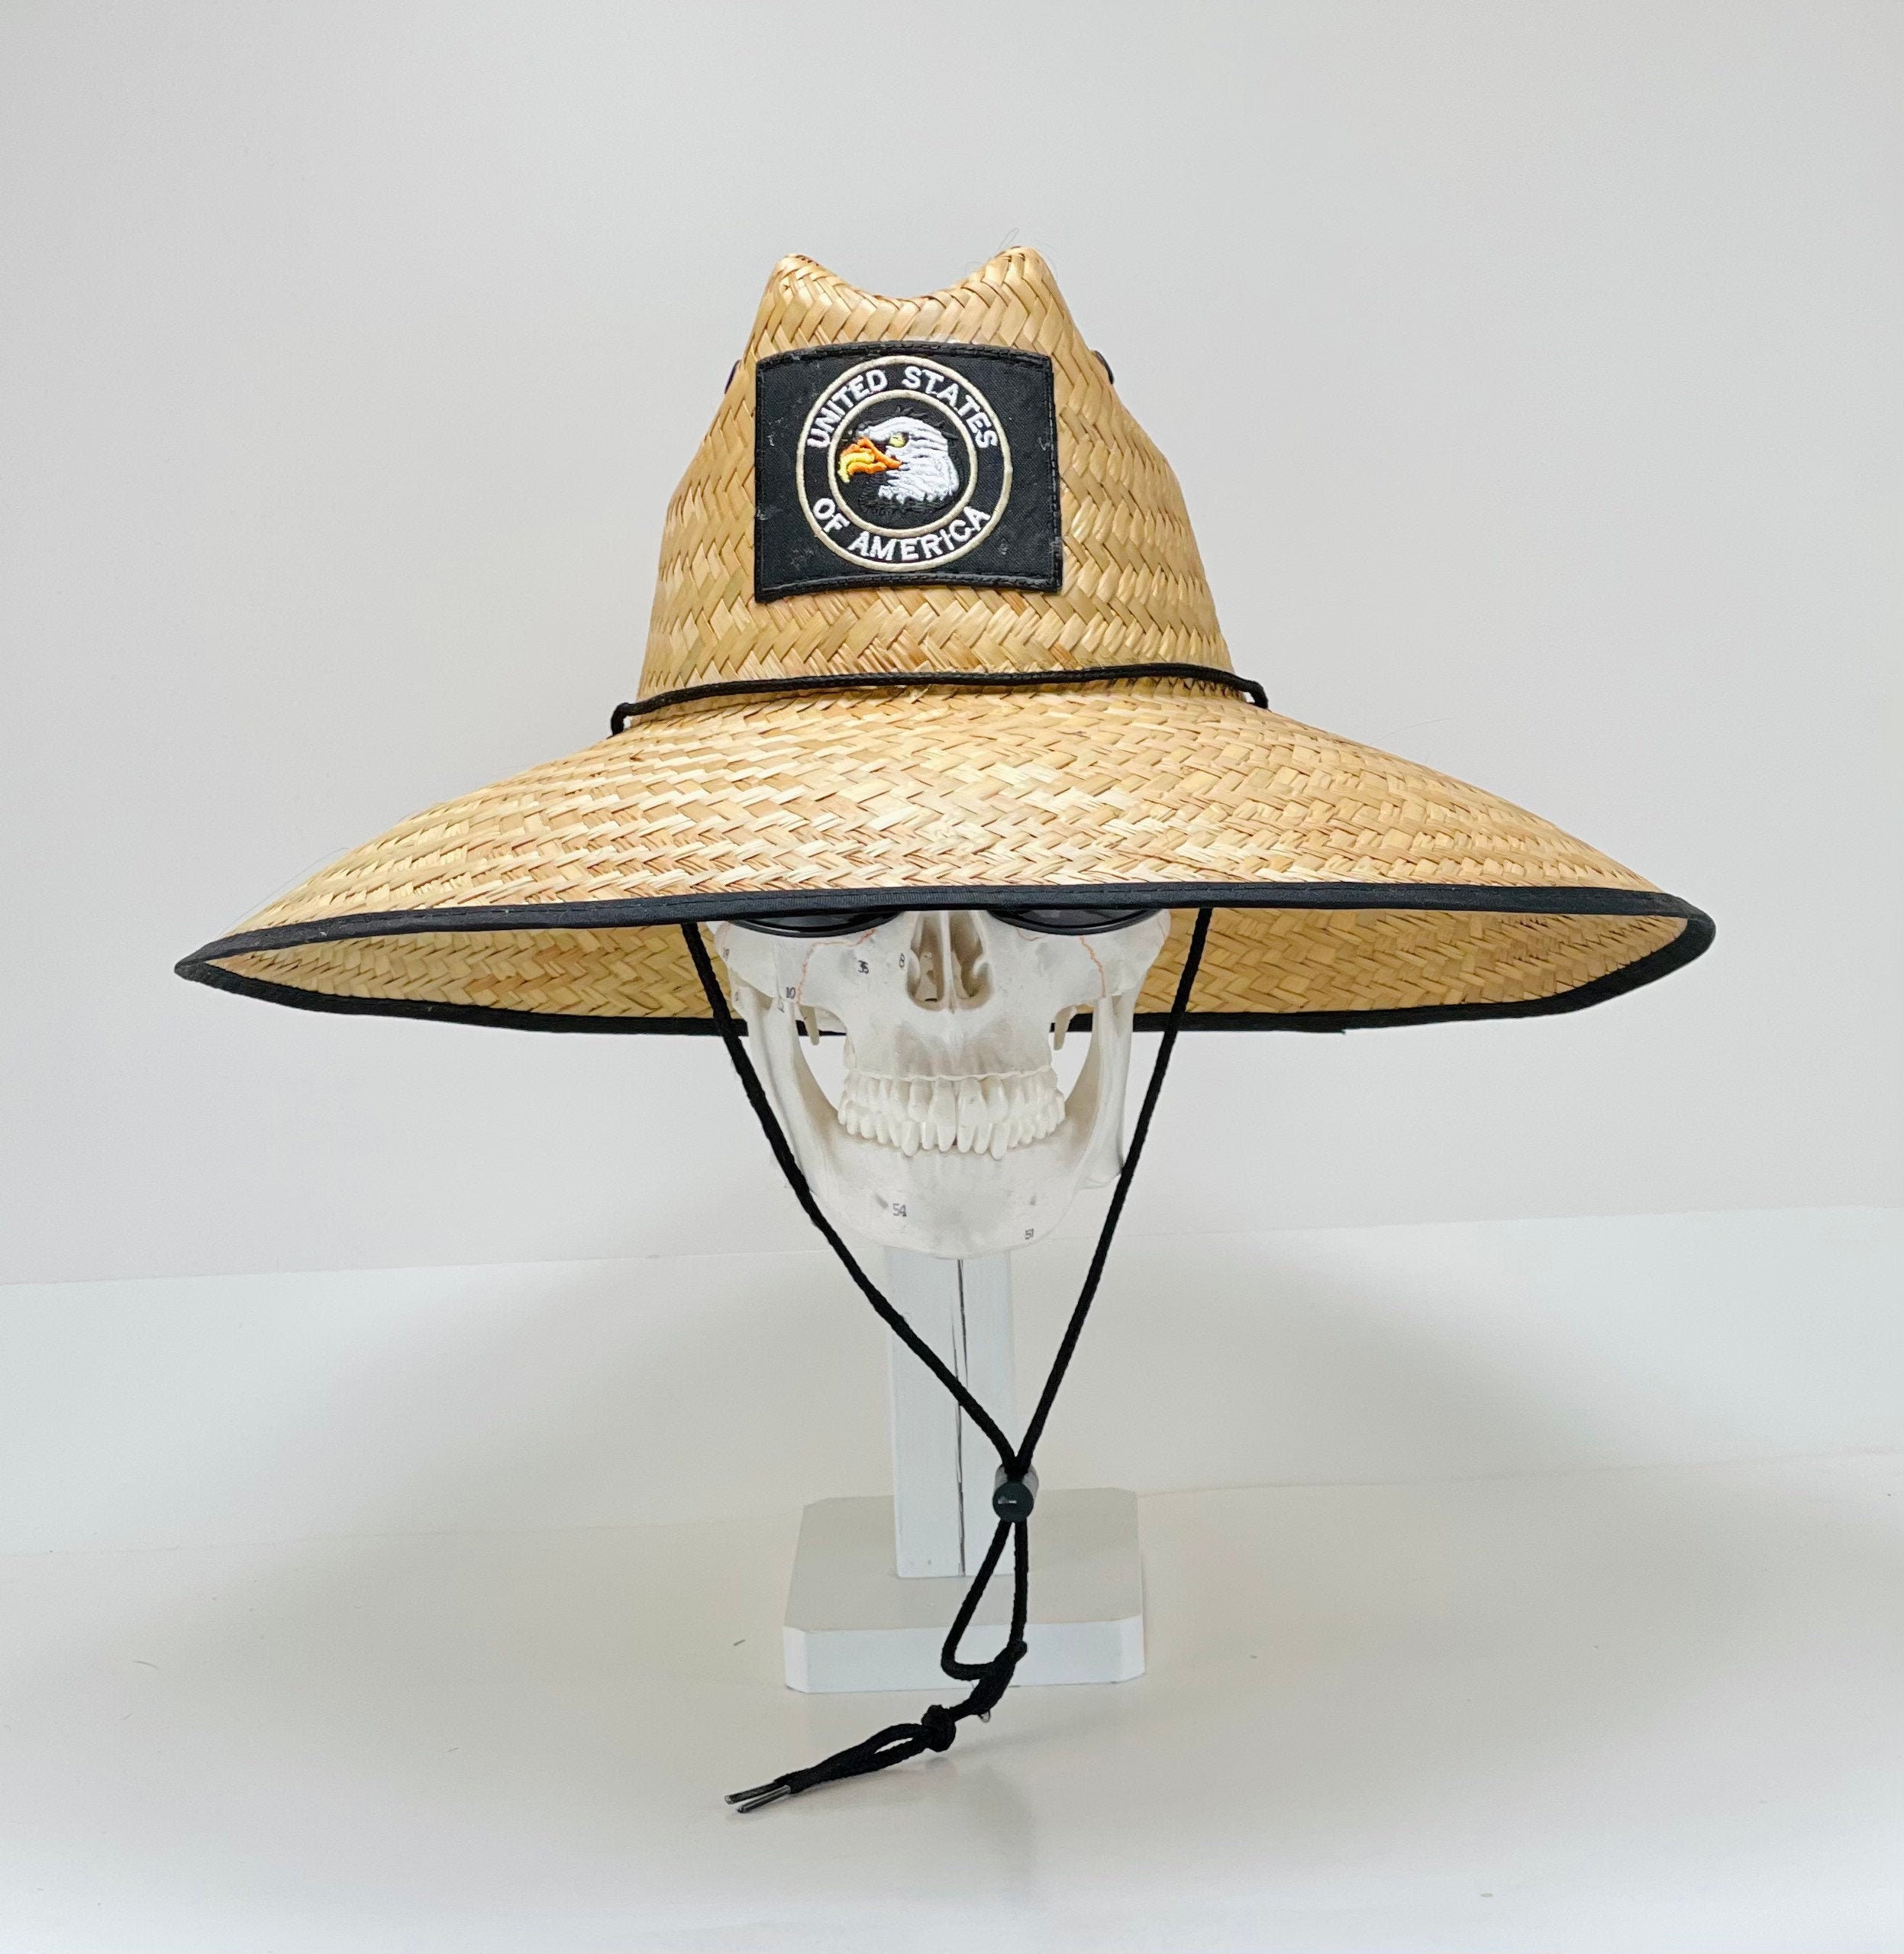 Gardening & Fishing Straw Hat, Brim Size 5.75 In. Inside Circumference  About 23 In. Overall Hat Size Total Sun Coverage 19.5 X 17.5 In. 